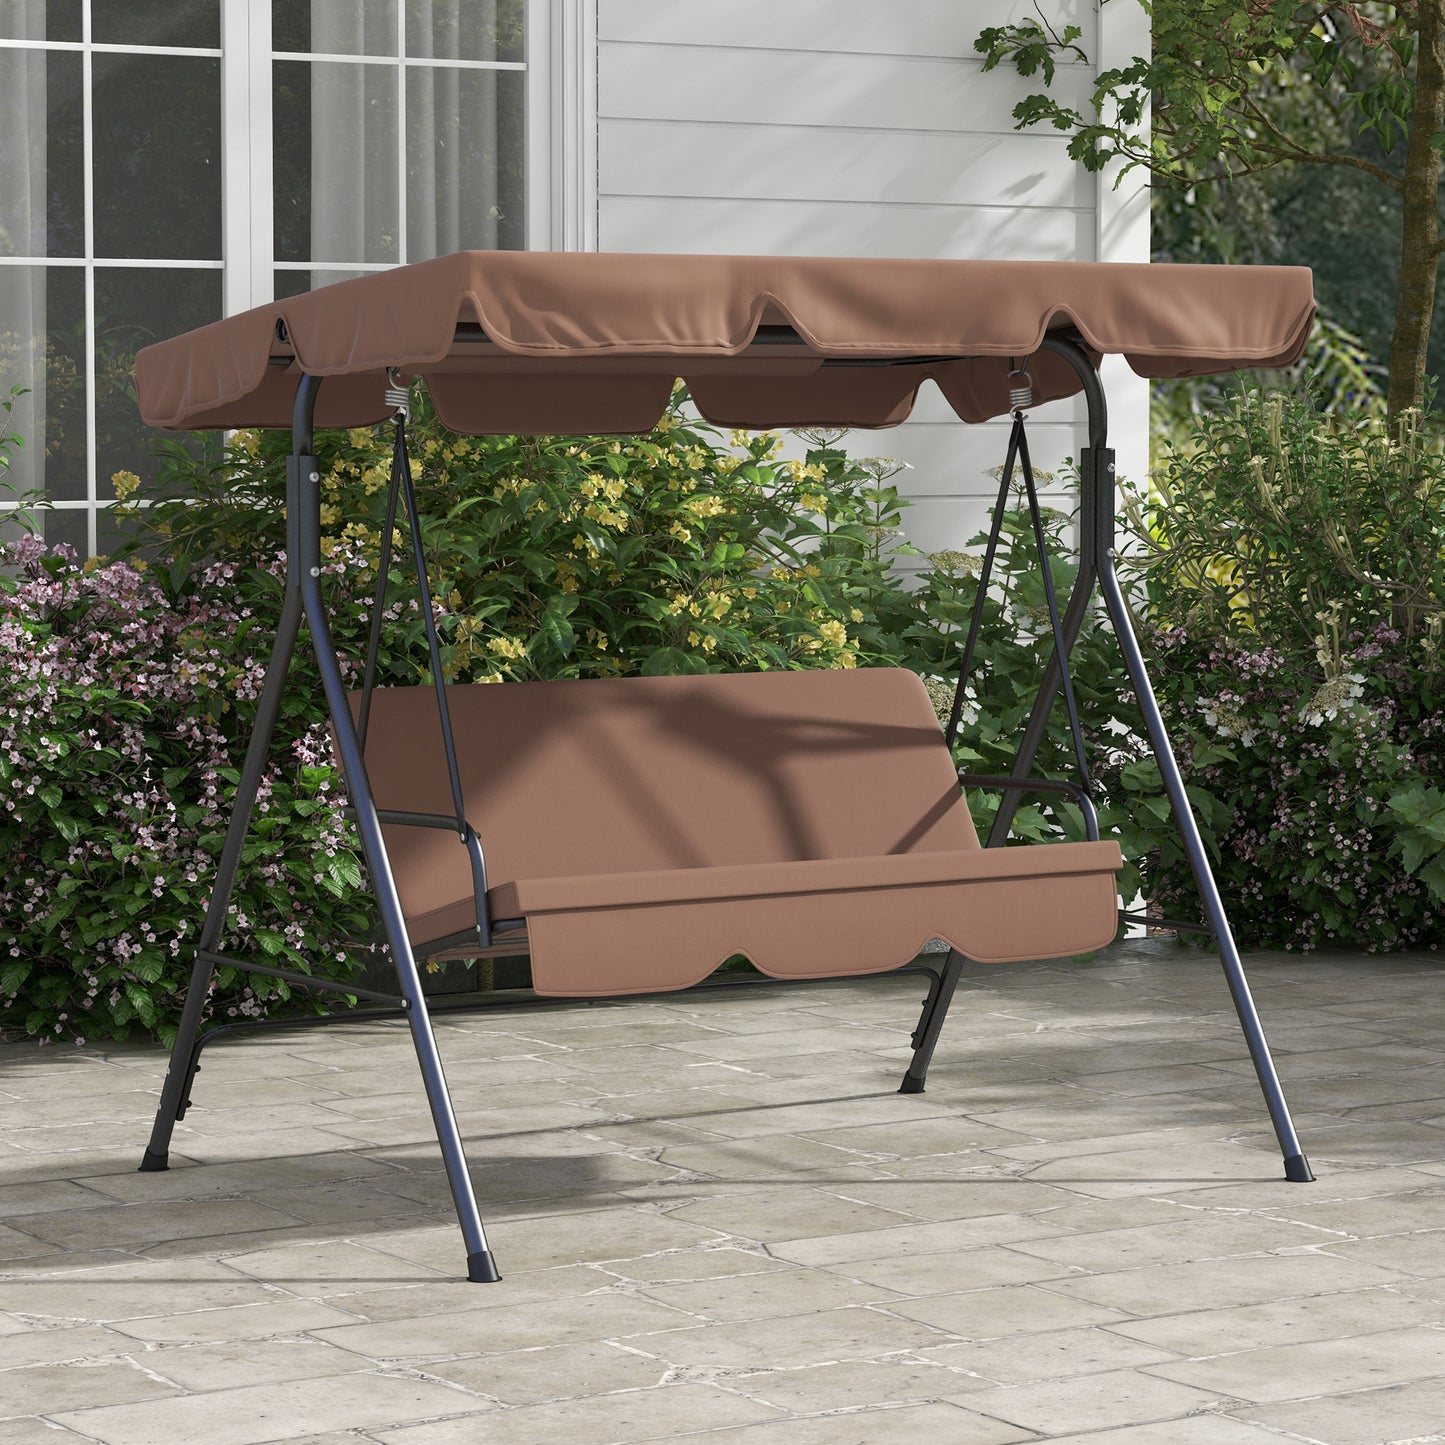 3-Seater Garden Swing with Tilting Sun Canopy and Cushions, 172x110x153 cm, Brown and Black